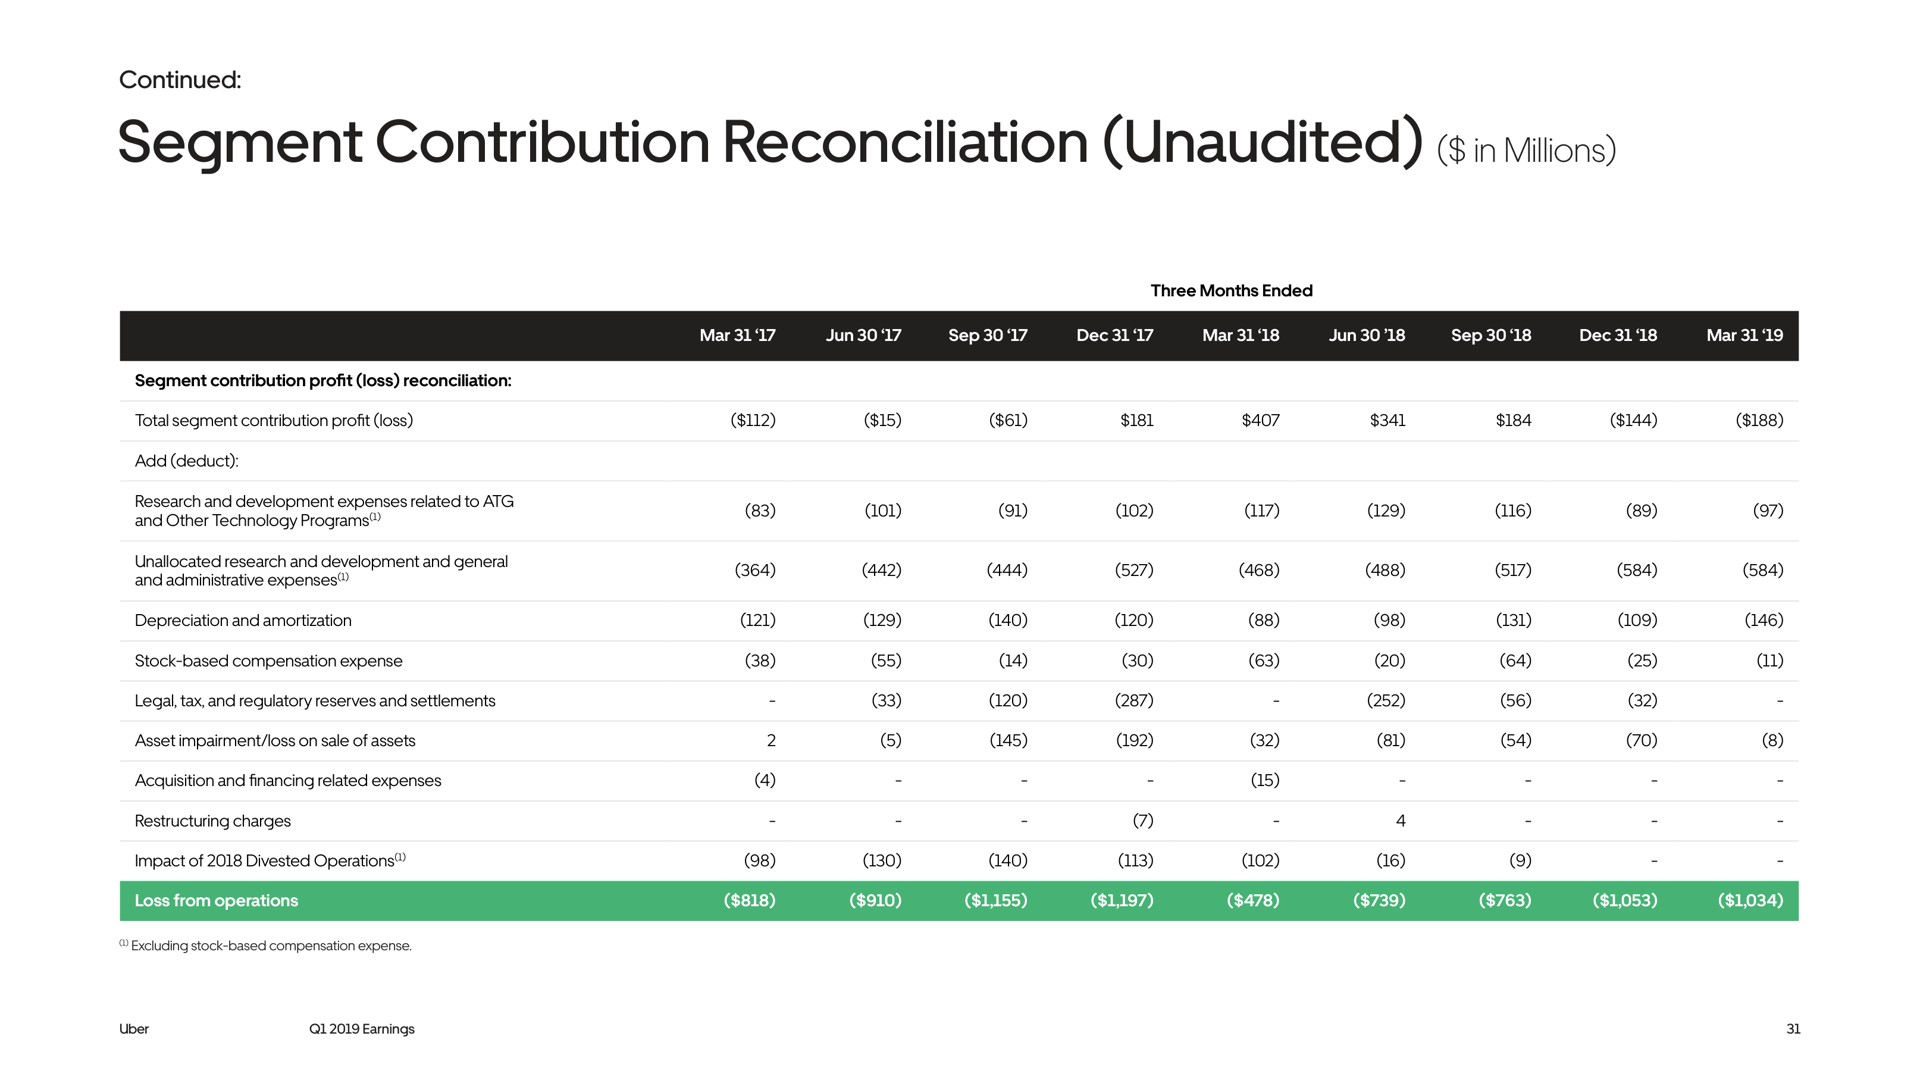 segment contribution reconciliation unaudited in millions continued total profit loss add deduct charges impact of divested operations loss from operations | Uber